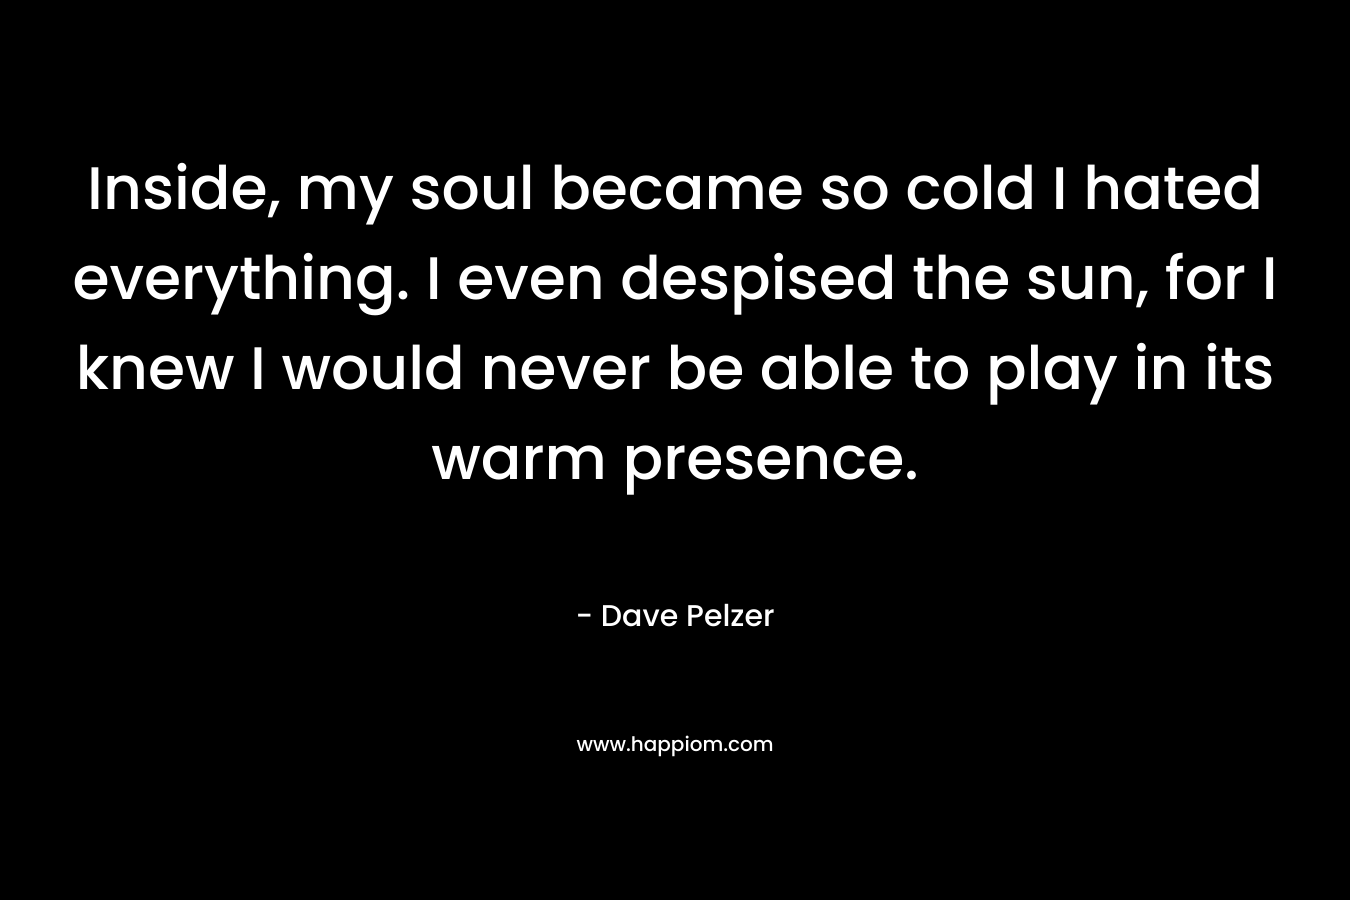 Inside, my soul became so cold I hated everything. I even despised the sun, for I knew I would never be able to play in its warm presence. – Dave Pelzer